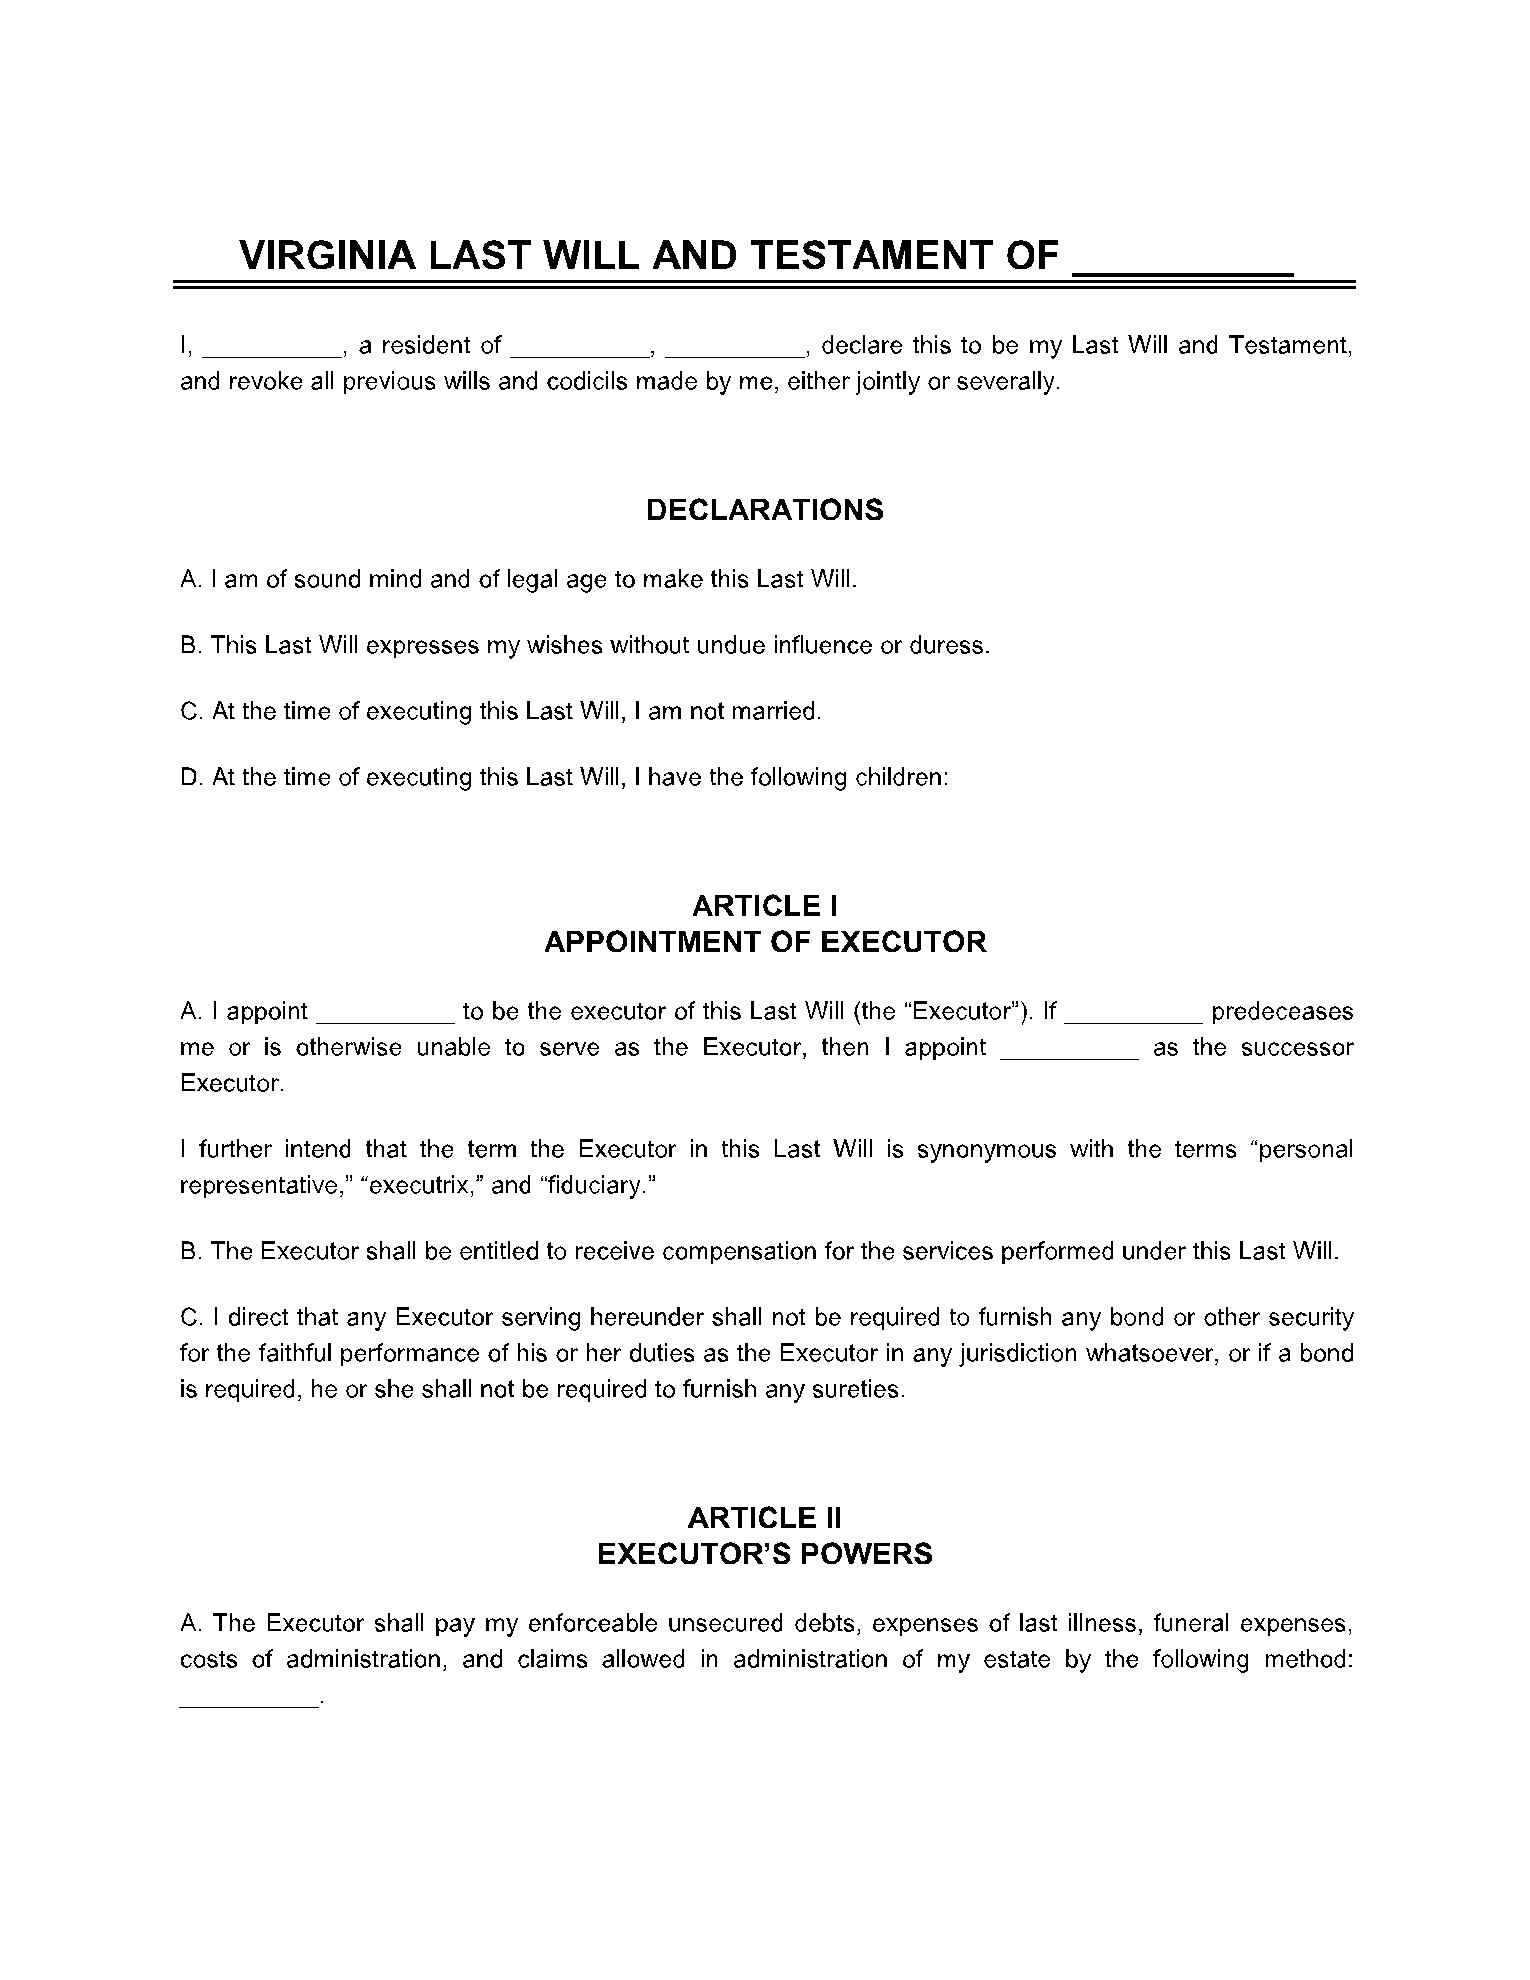 Virginia Last Will and Testament Template